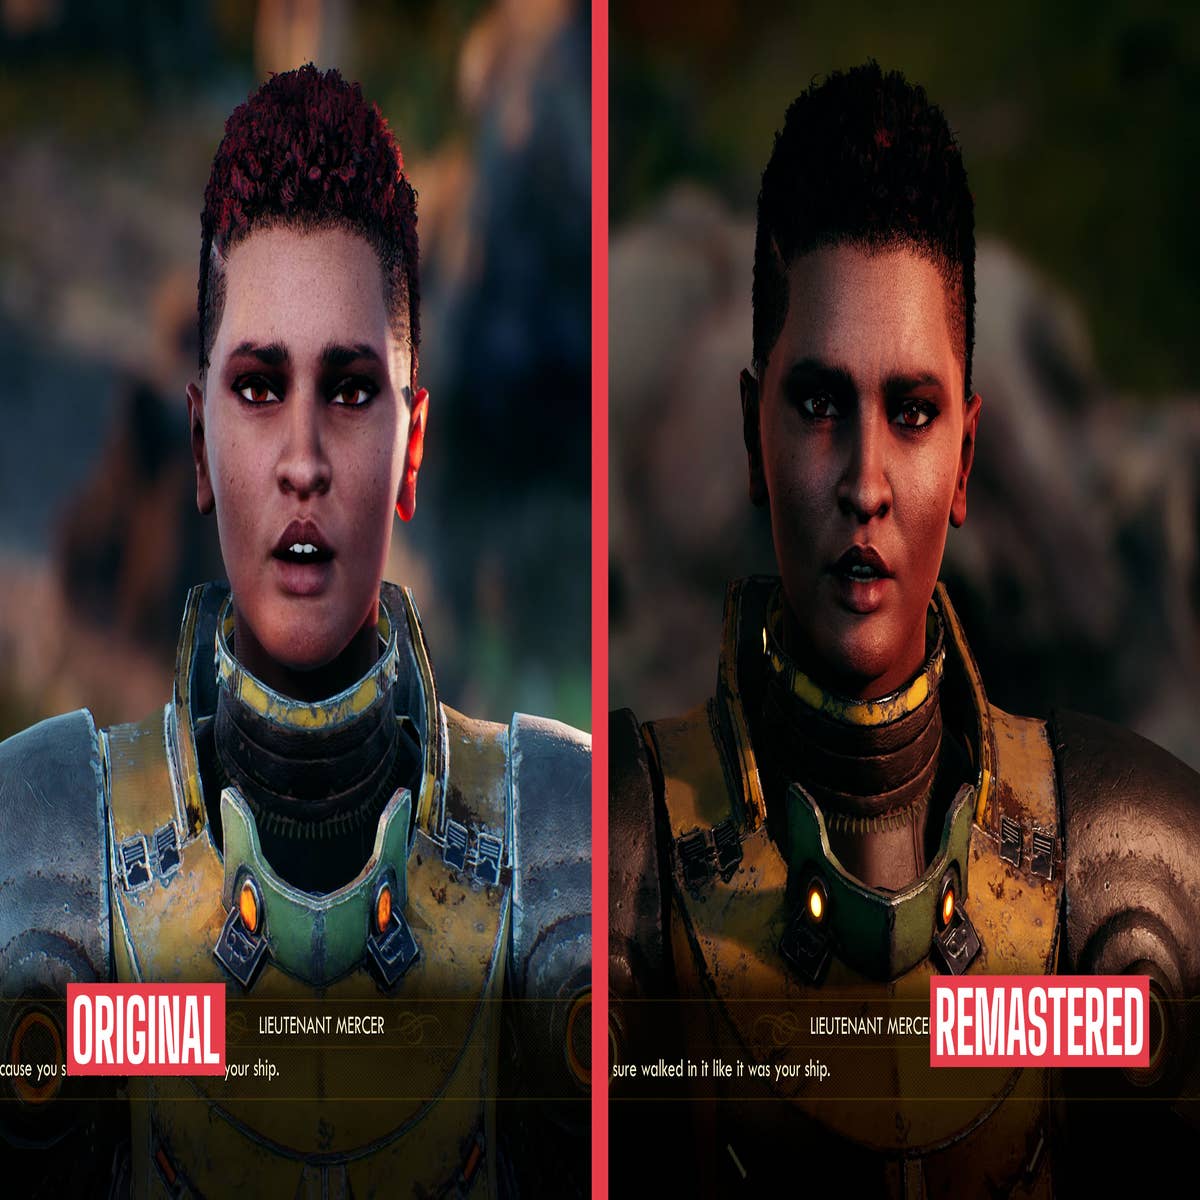 The Outer Worlds Review - It's Not Spacer's Choice, It's the Best Choice